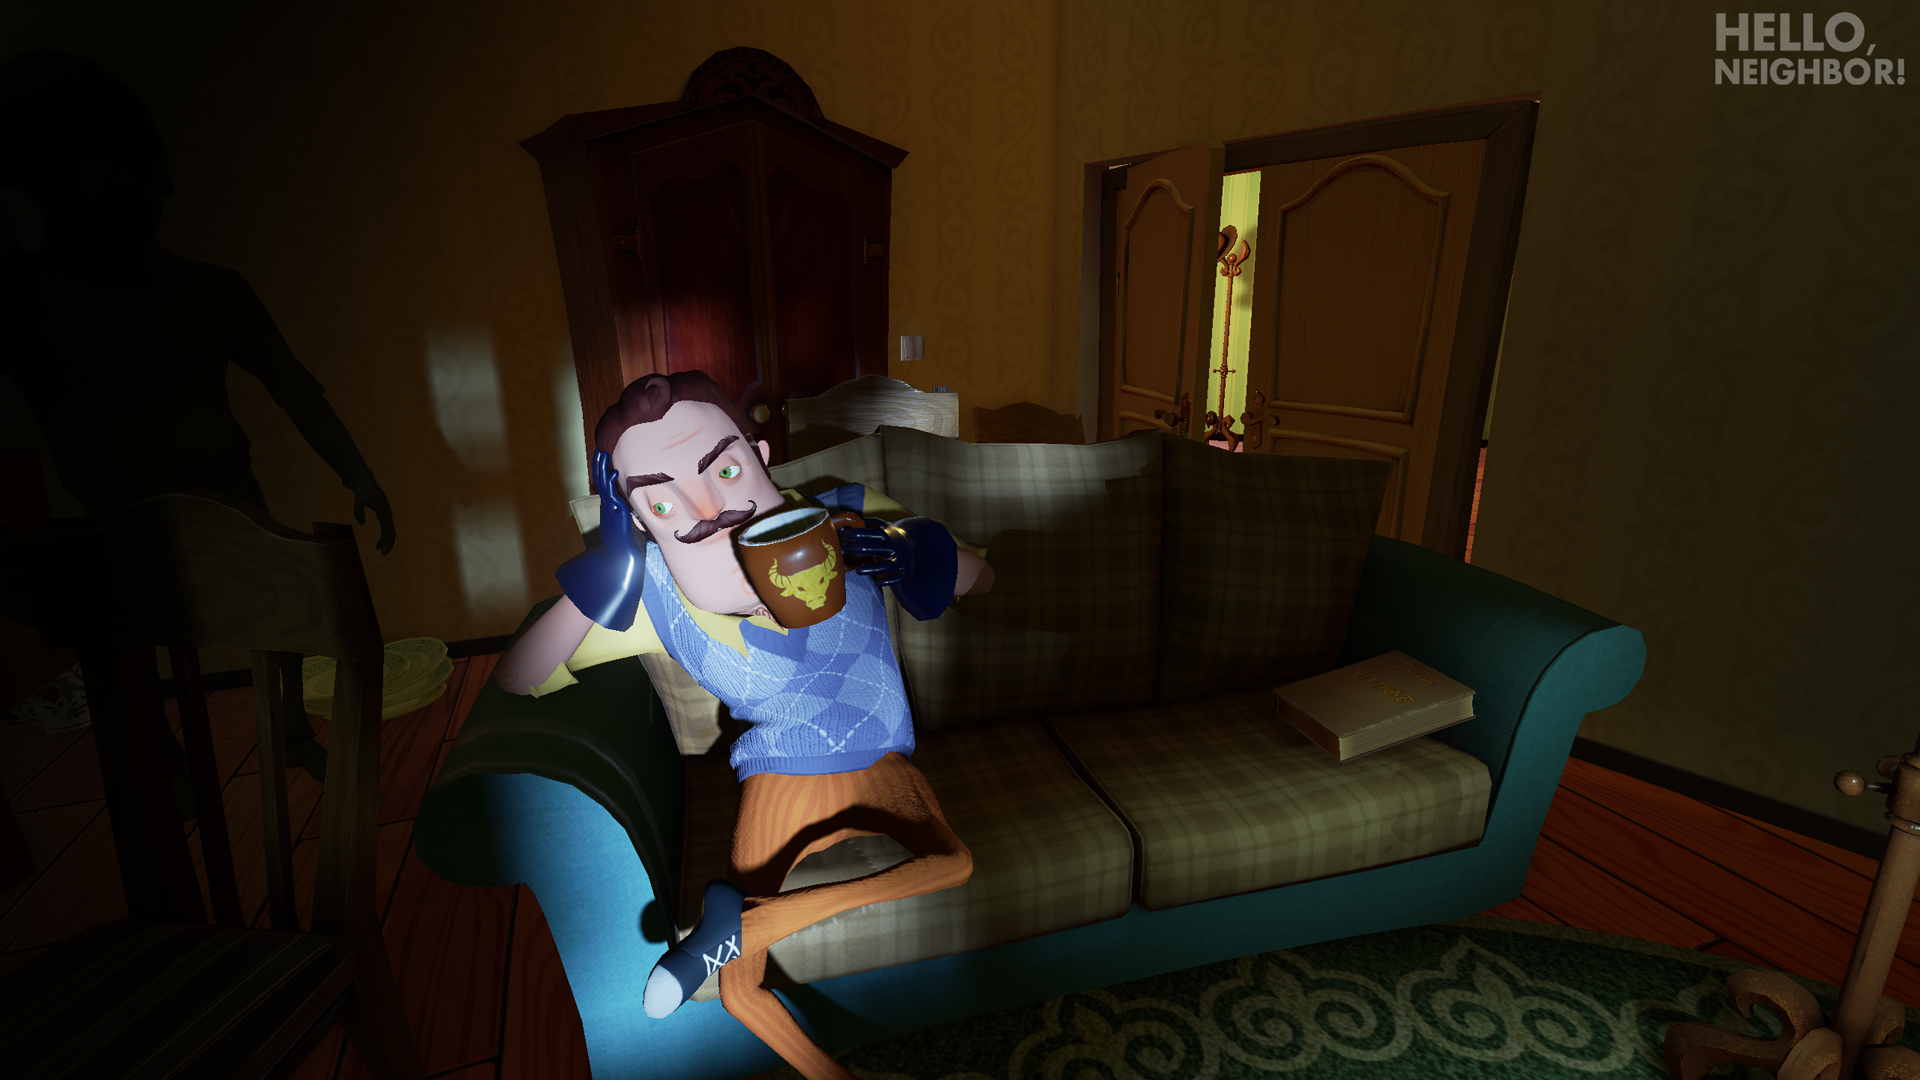 In-game scene from Hello Neighbor with character on couch.